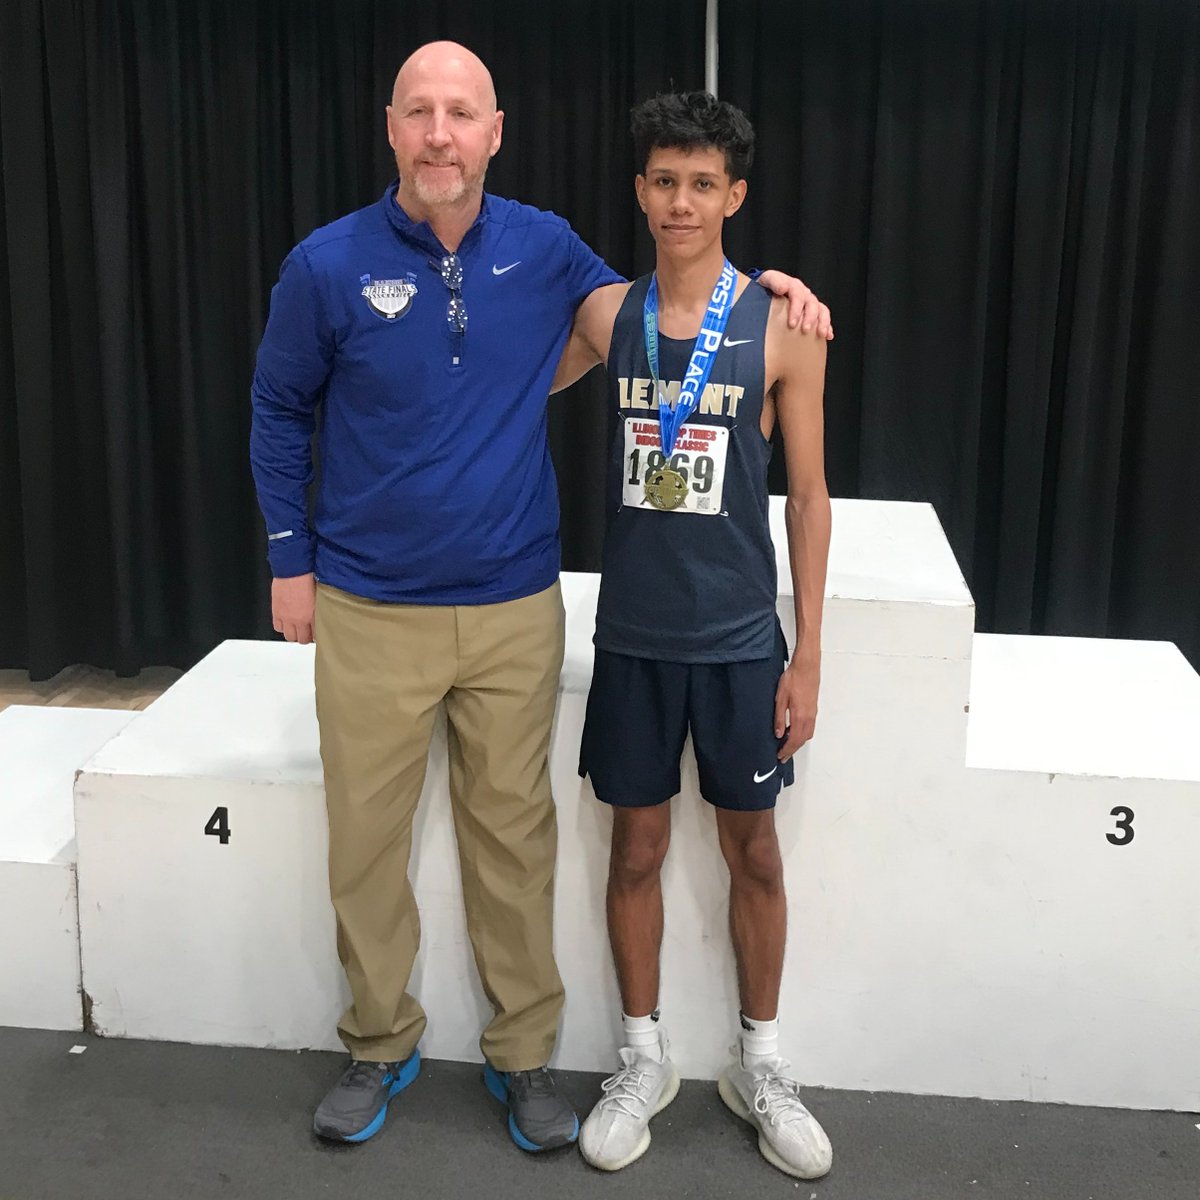 Congrats to @Lemont_HS's Quinton Peterson, winner of the Class 3A 60 meter hurdles at the 2024 Illinois Top Times High School Track & Field Indoor Championship! Last spring, Quinton qualified for the 2023 IHSA Class 3A State Finals in the 110 and 300 hurdles events. #WeAreLemont